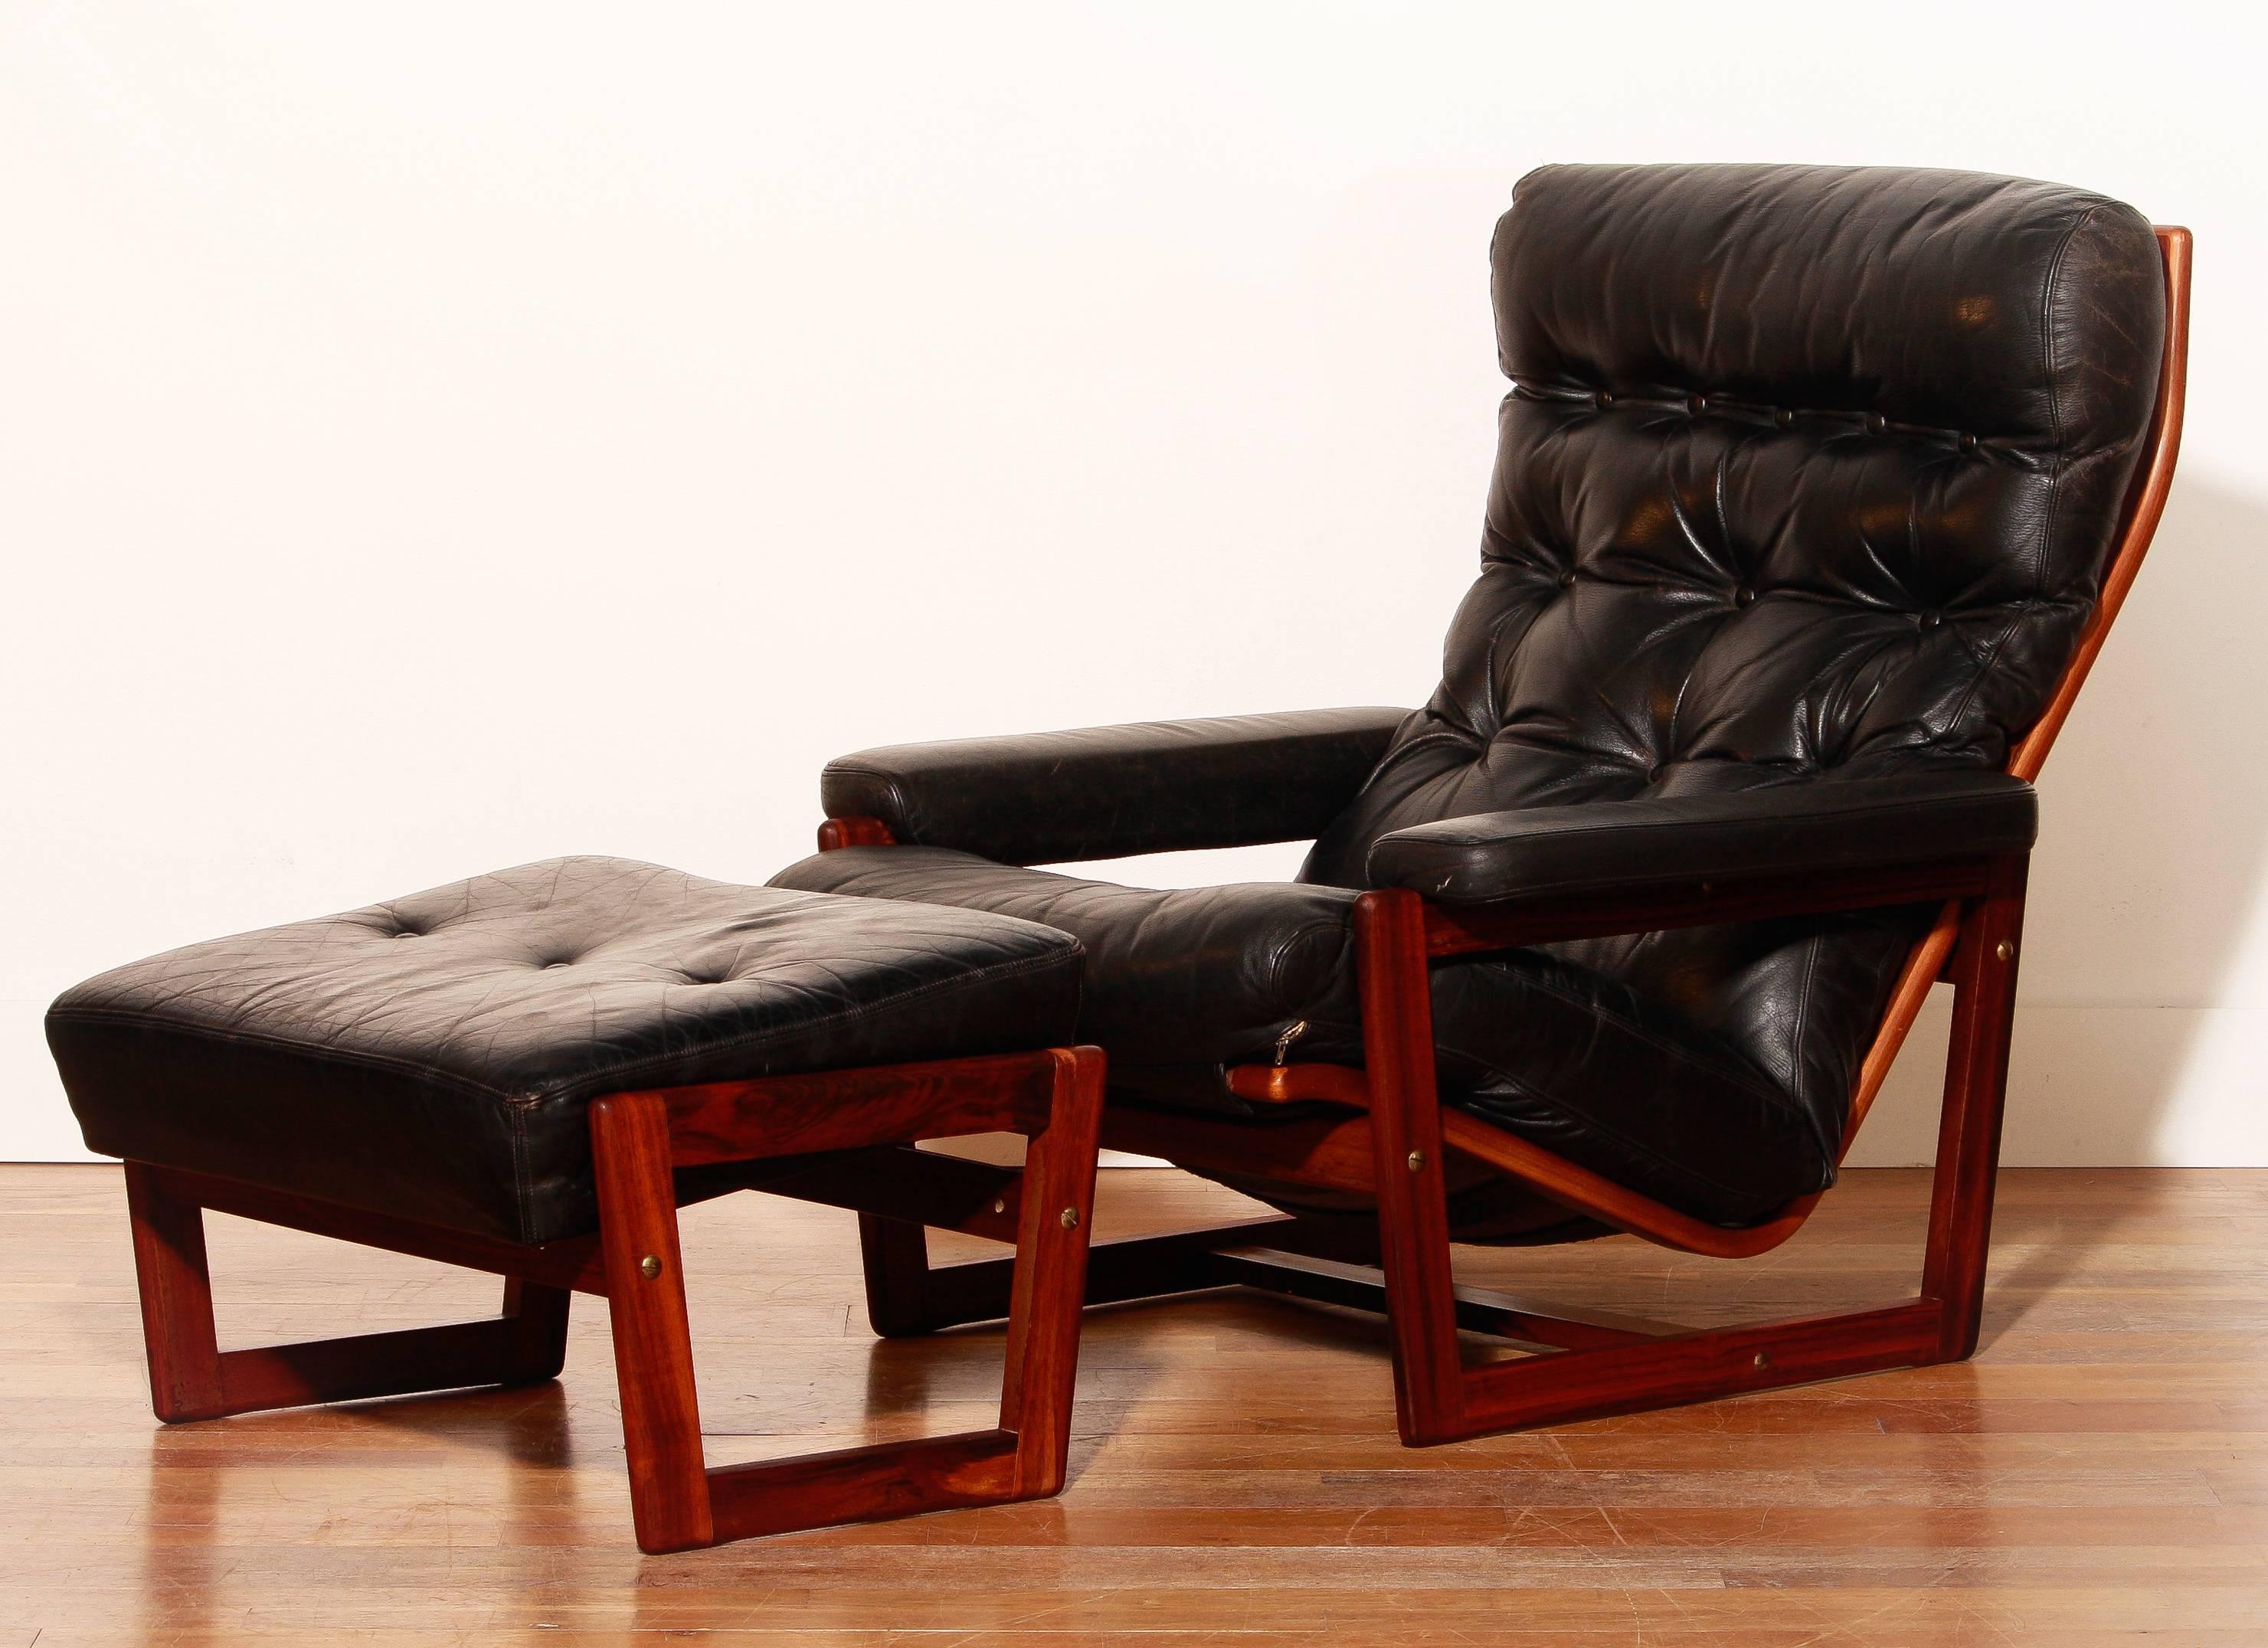 1950s-1960s, Lennart Bender for Ulferts, Leather Lounge Chair with Ottoman 2